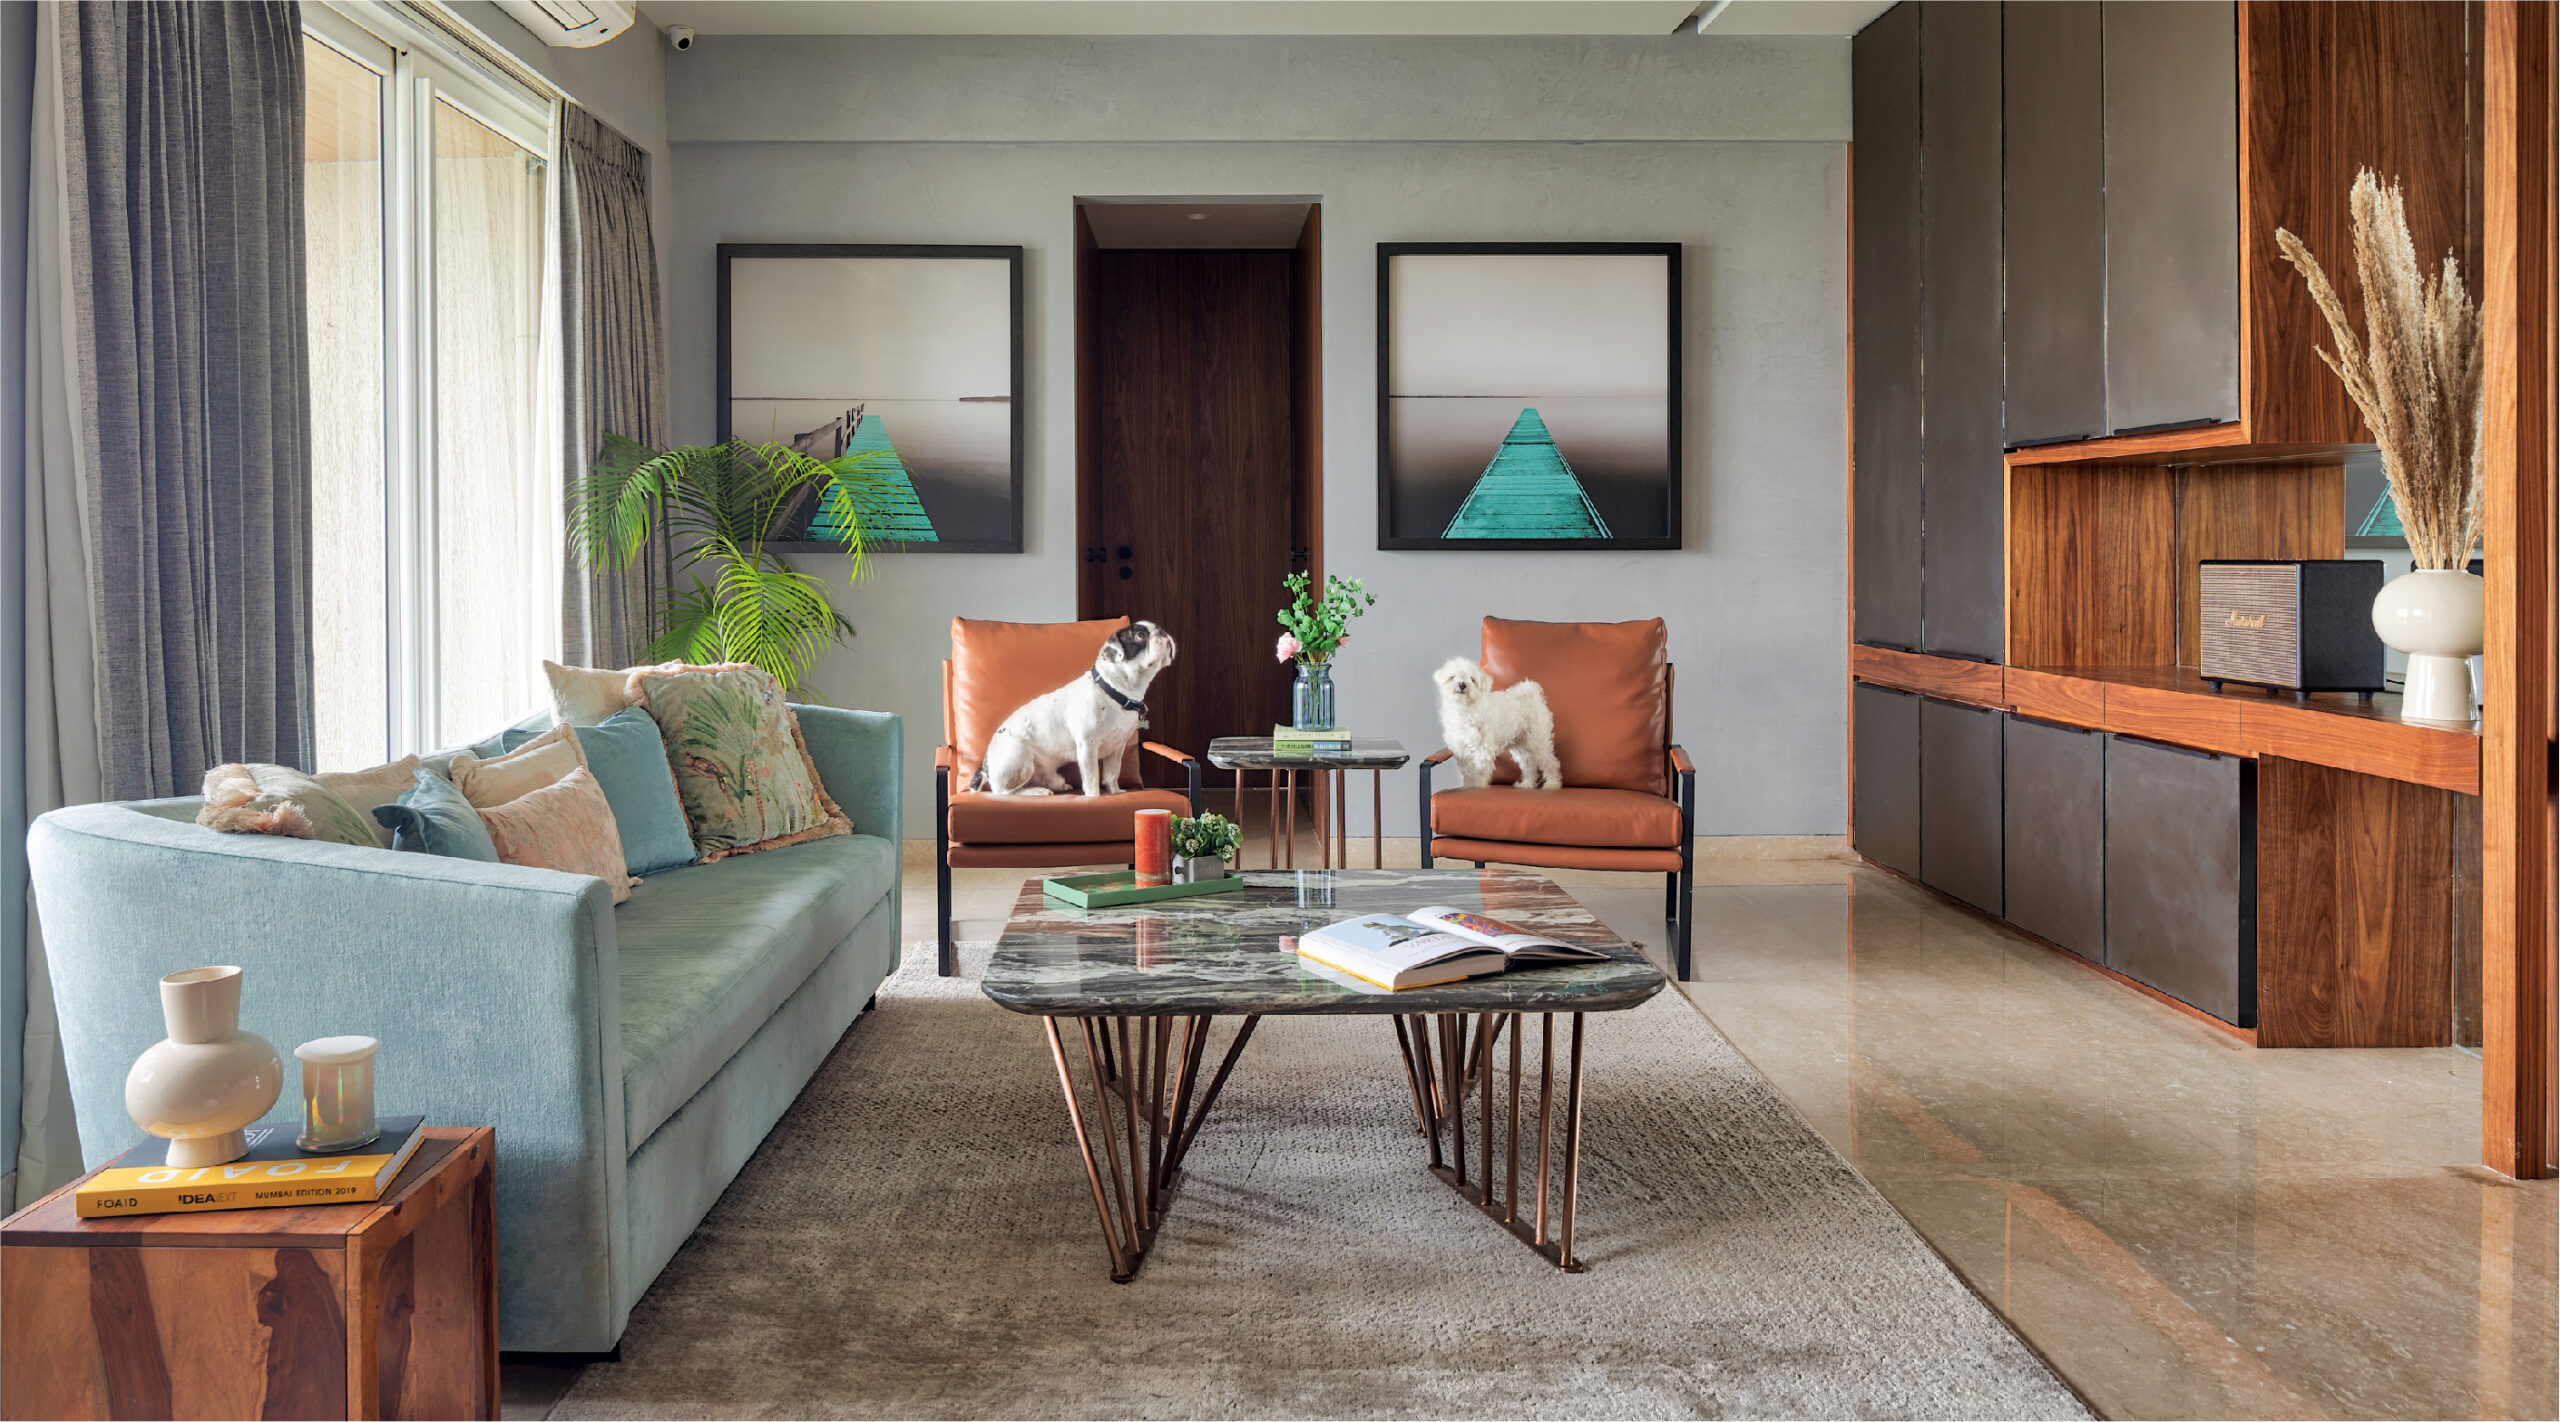 A serene oasis called the Teal Address